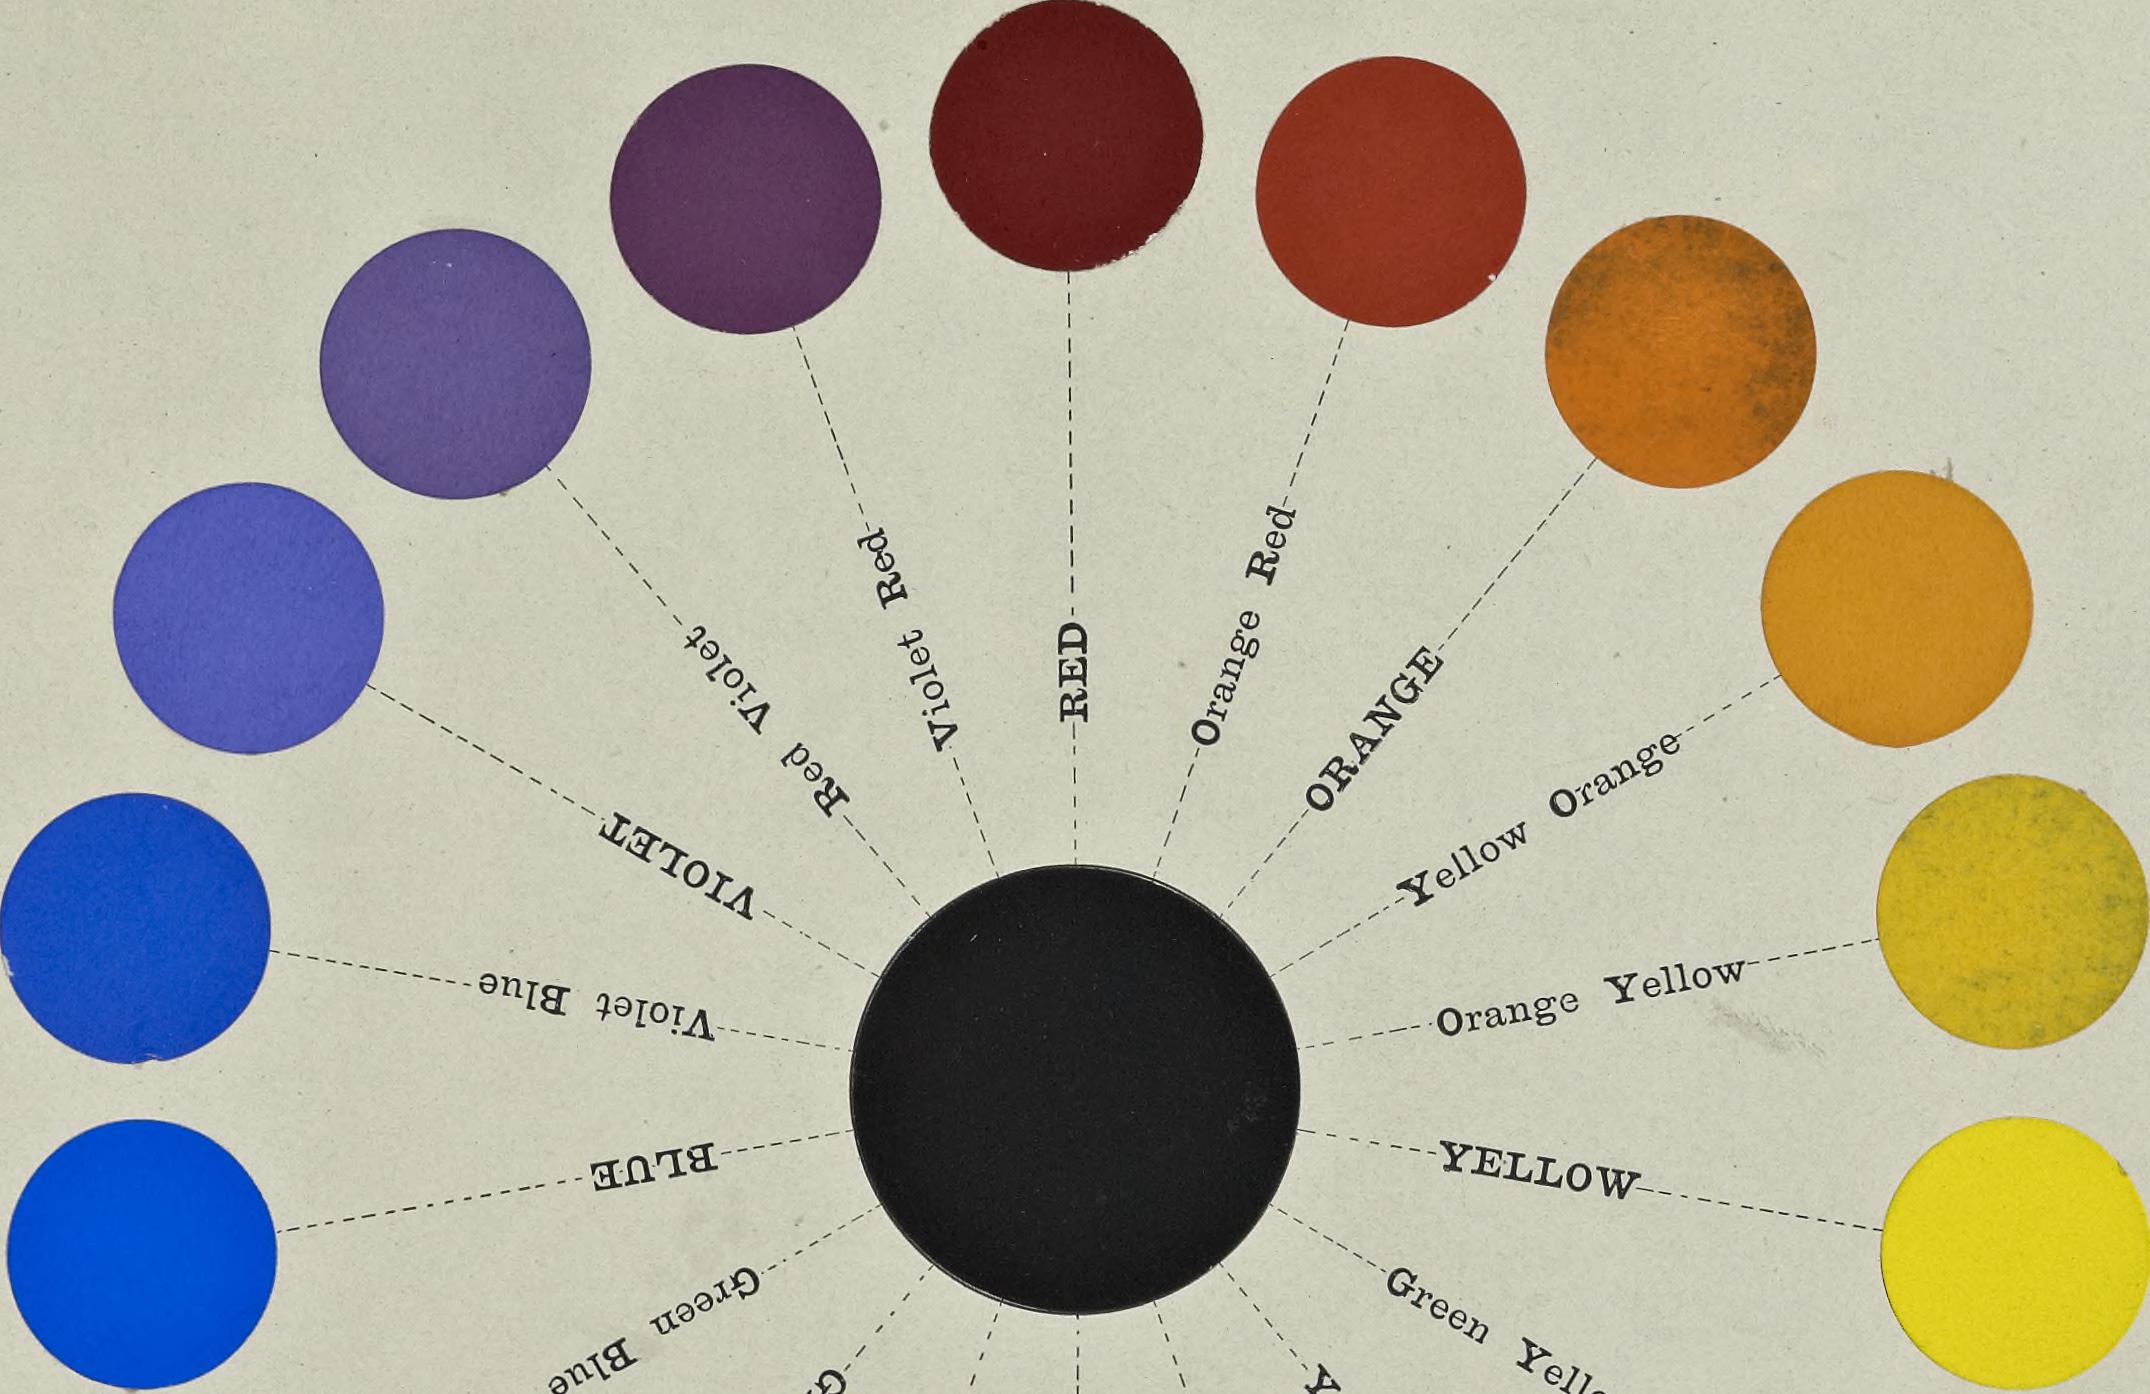 Before Photoshop, the book of color